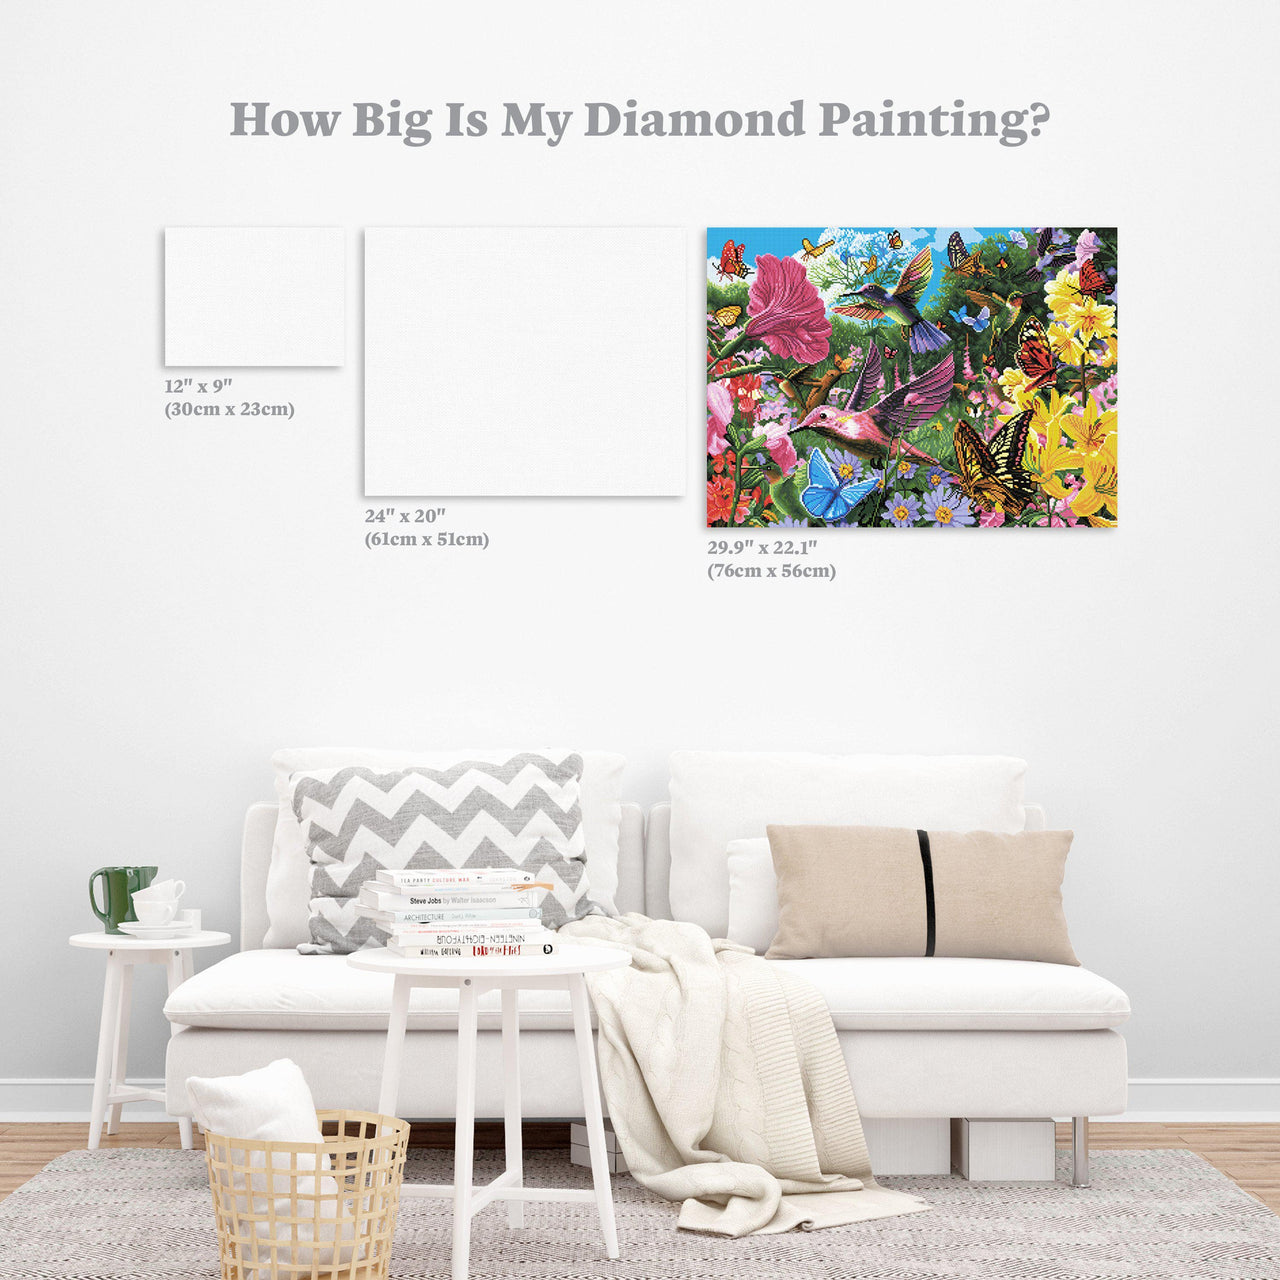 Diamond Painting Hummingbird Garden 30" x 22" (76cm x 56cm) / Square with 57 Colors including 4 ABs / 66,742